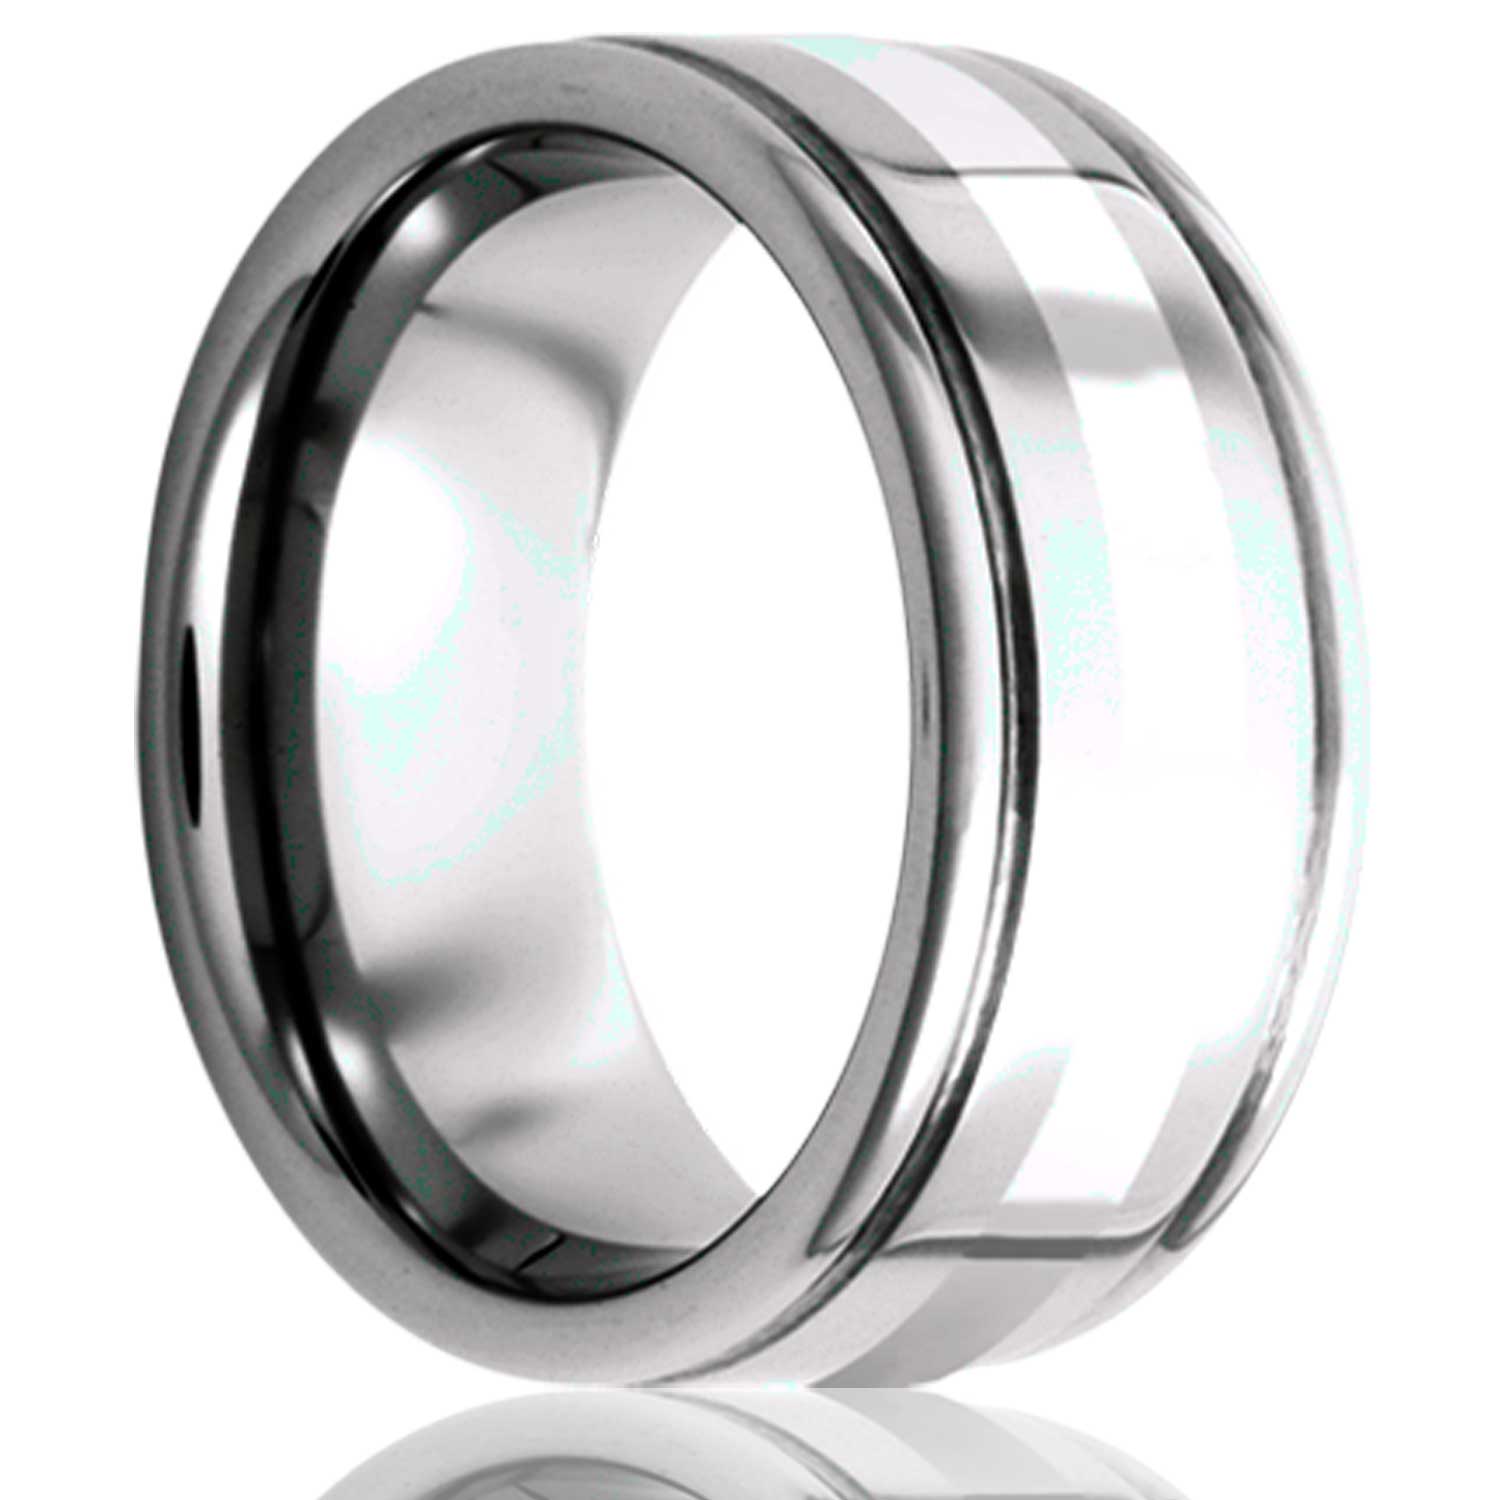 A argentium silver inlay tungsten wedding band with grooved edges displayed on a neutral white background.